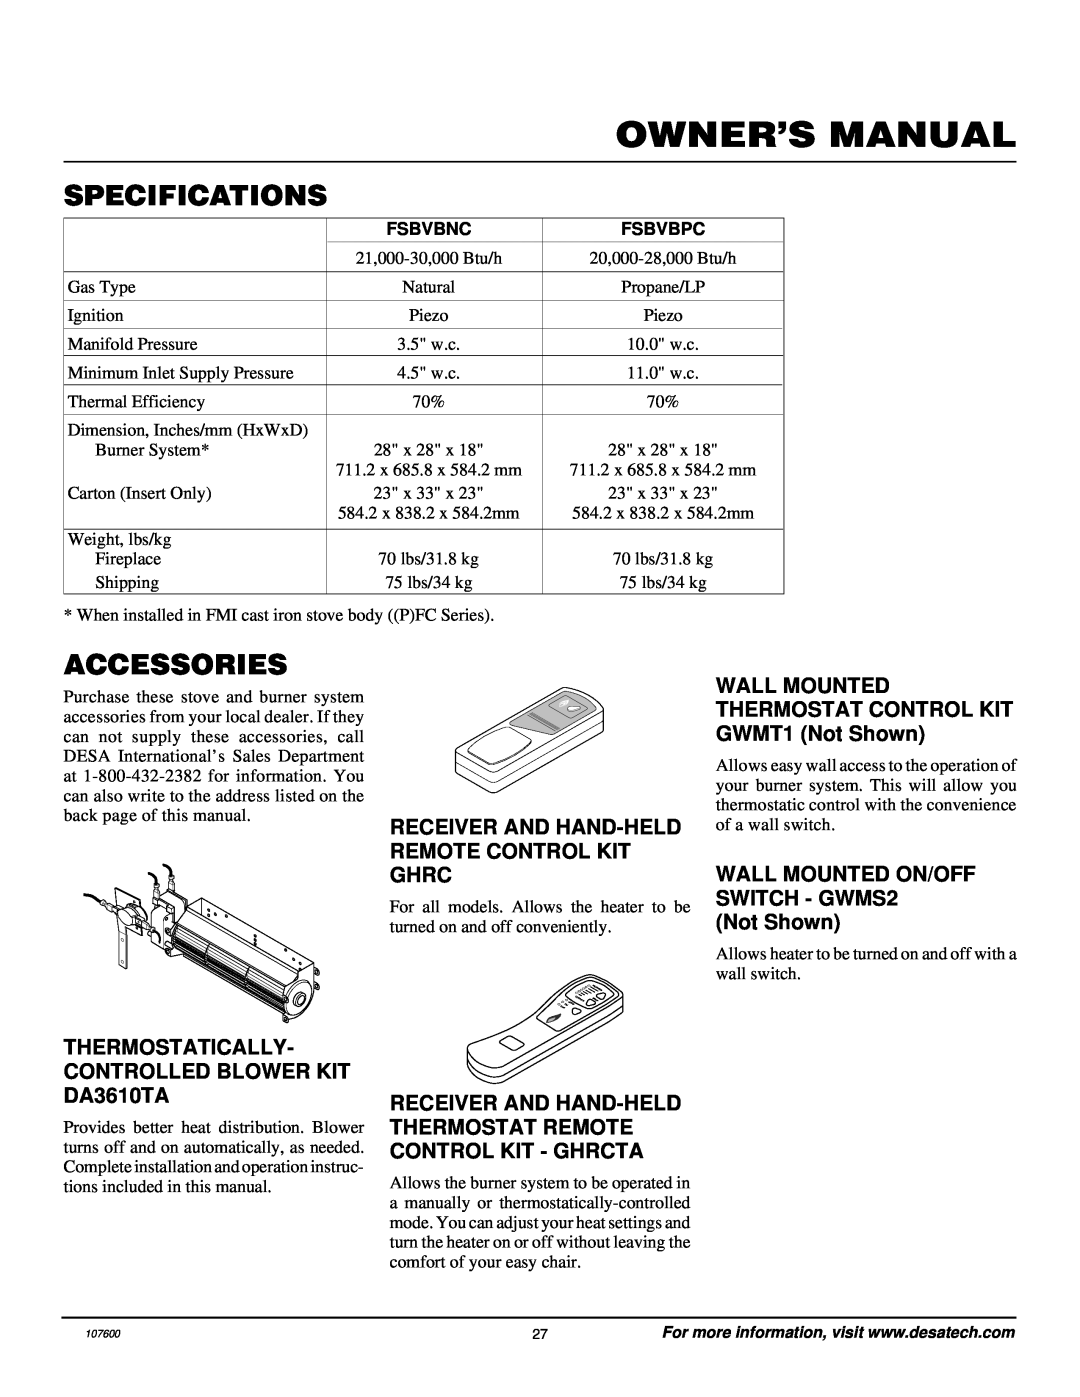 Desa FSBVBPC, FSBVBNC installation manual Specifications, Accessories, Receiver And Hand-Heldremote Control Kit Ghrc 